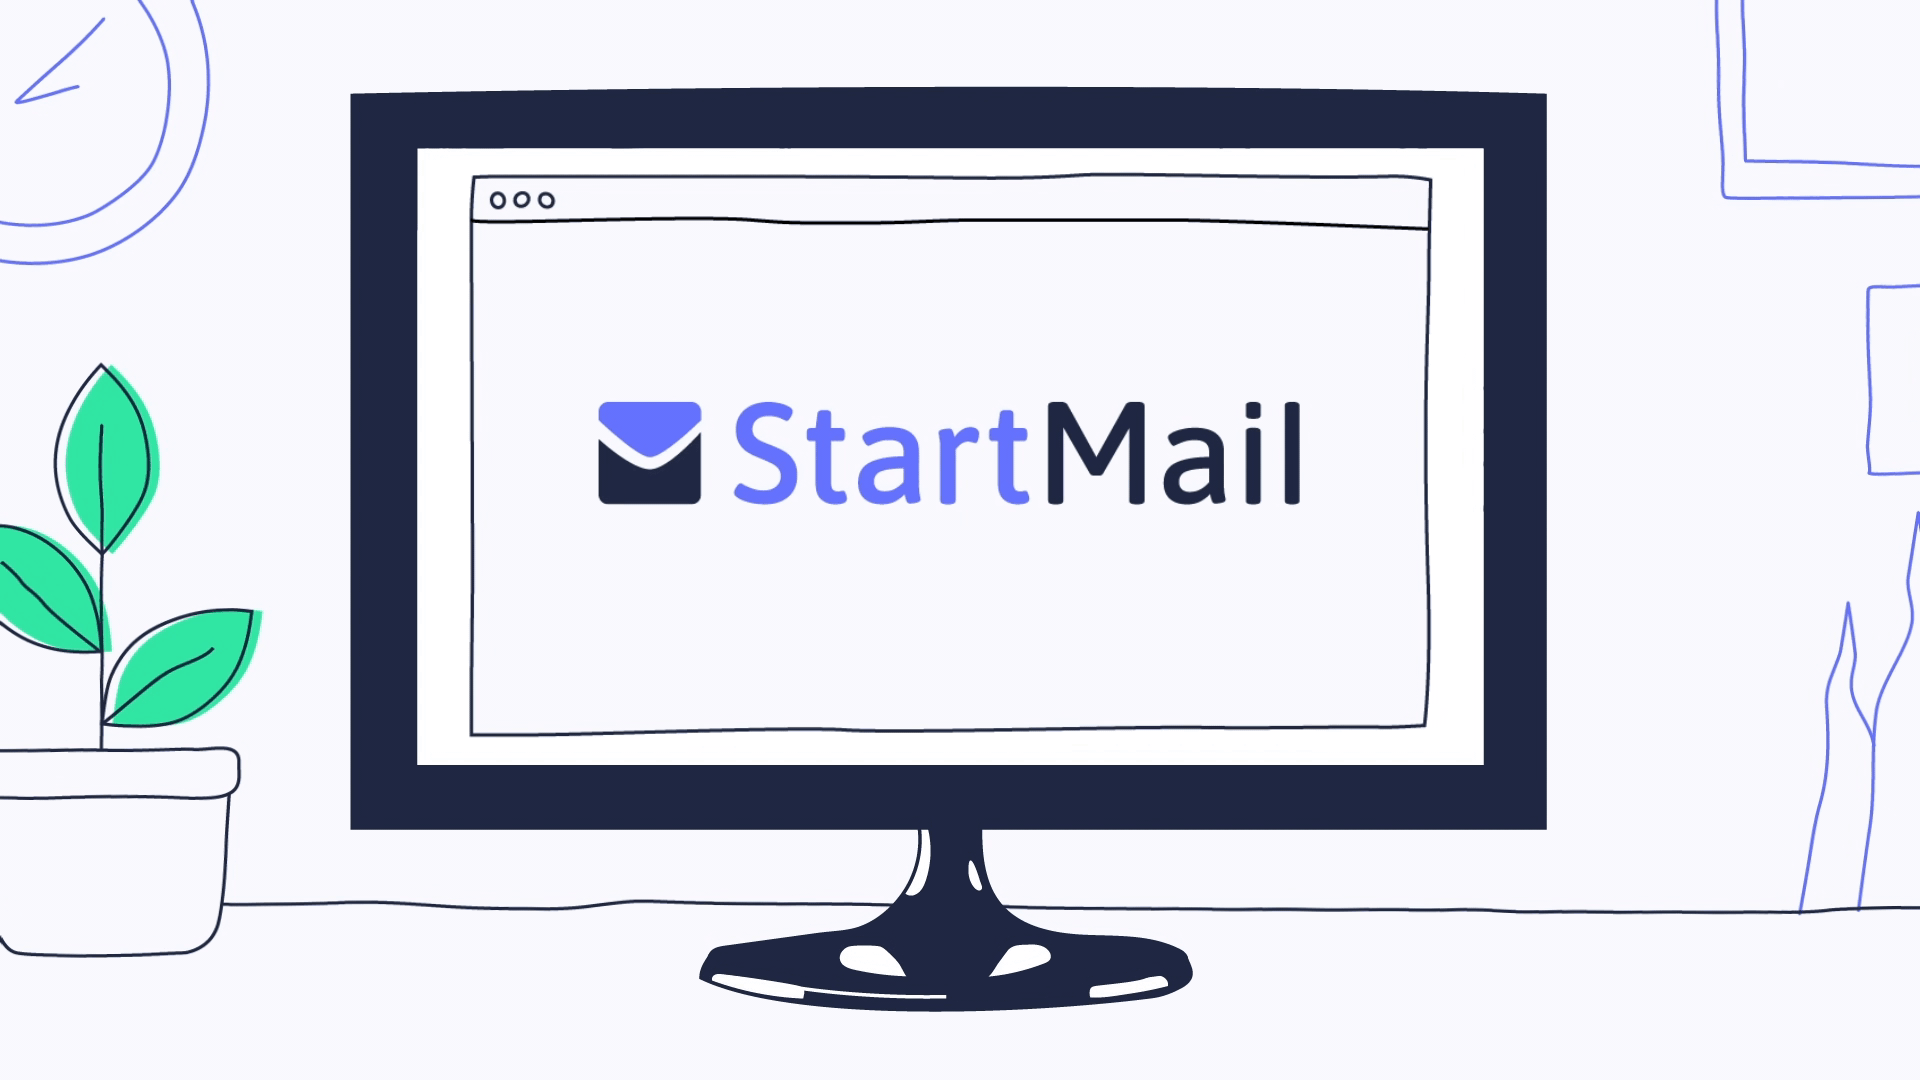 Short clip of the StartMail Video. An illustration of a desktop on a desk with a clock and a potted plant to the left and photo frames on the wall on the right. The desktop displays the StartMail logo. The content of the desktop gets folded into a paper plane, an illustrated hand grabs the paper plane and trows it back to the desktop. The paper plane is unfolded to the original image and displays the StartMail logo .